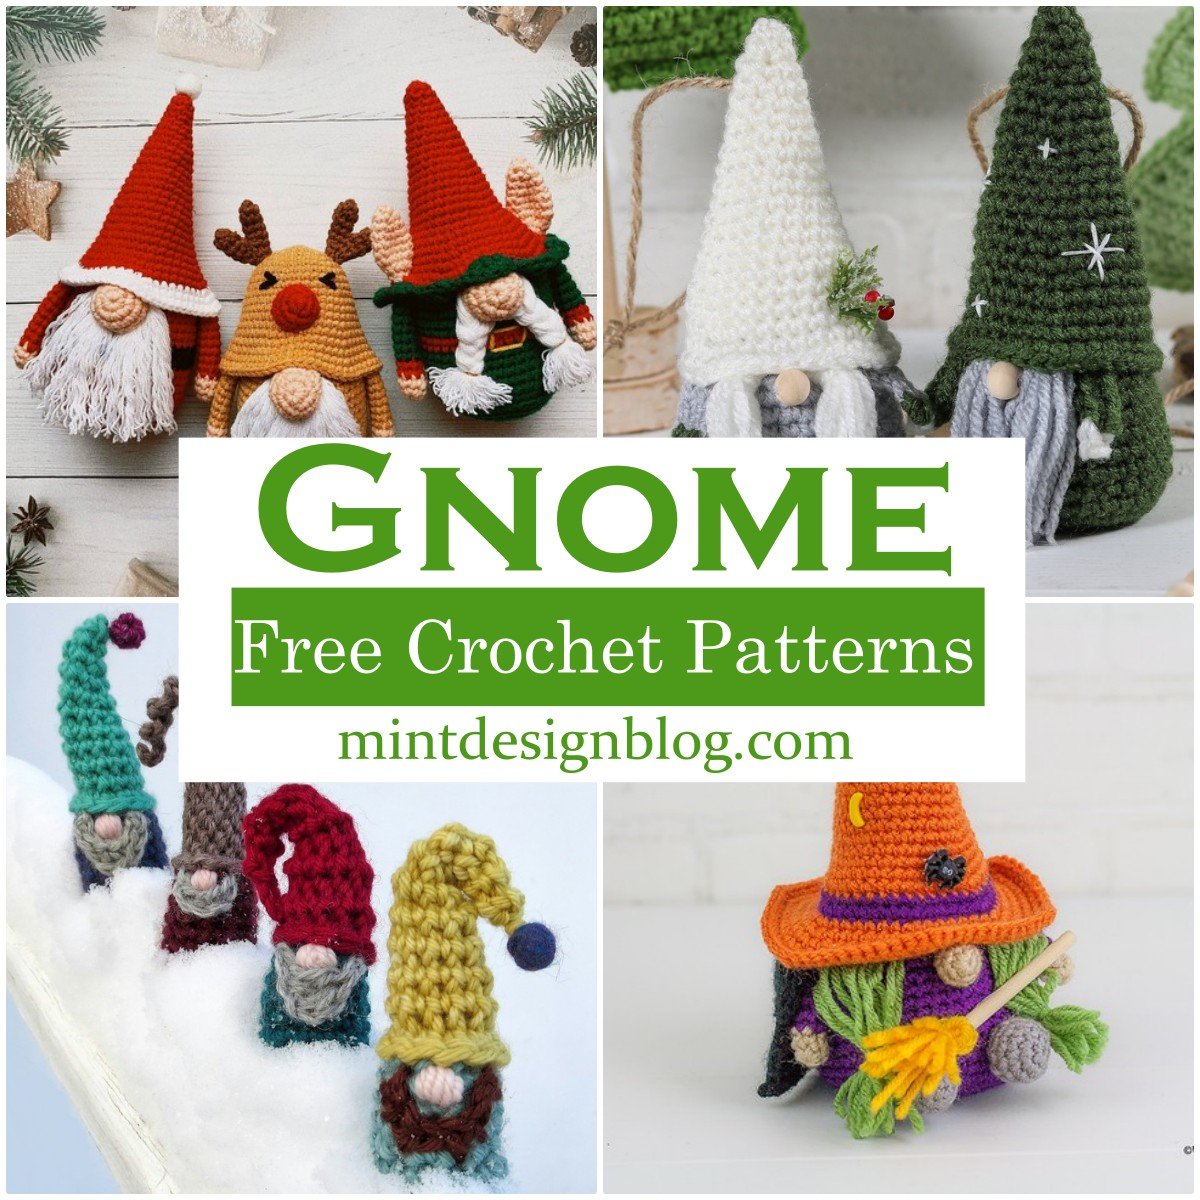 20 Free Crochet Gnome Patterns - How Do You Crochet a Gnome - Mint